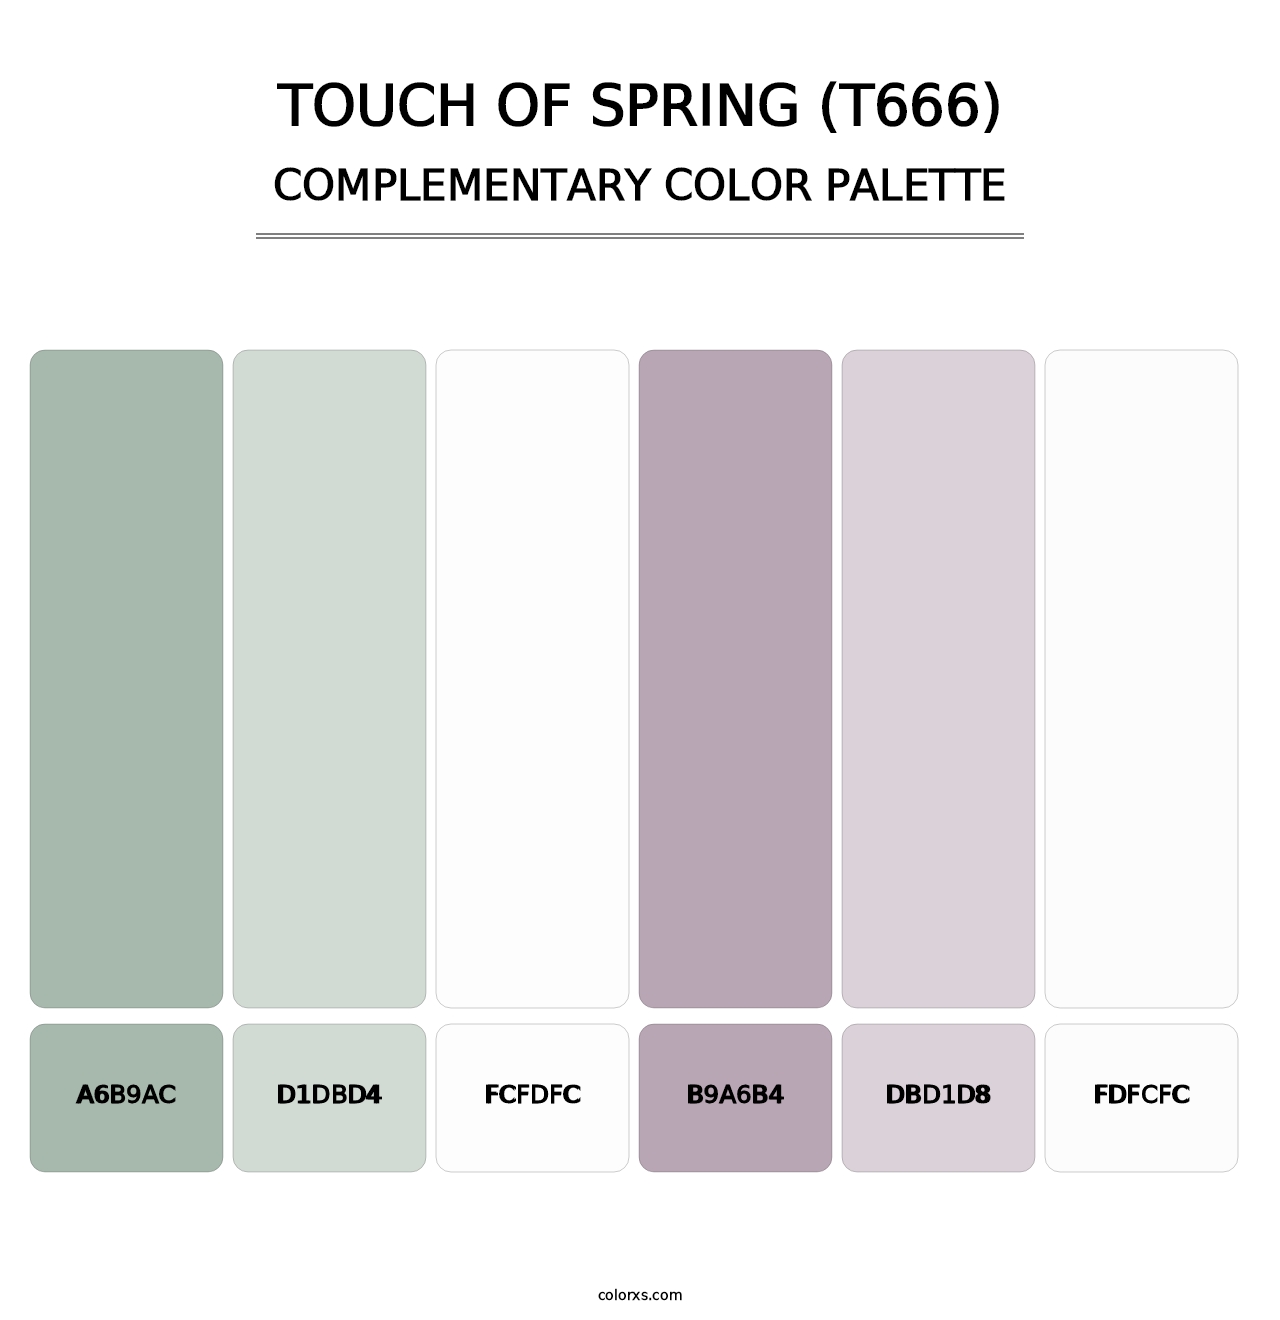 Touch of Spring (T666) - Complementary Color Palette